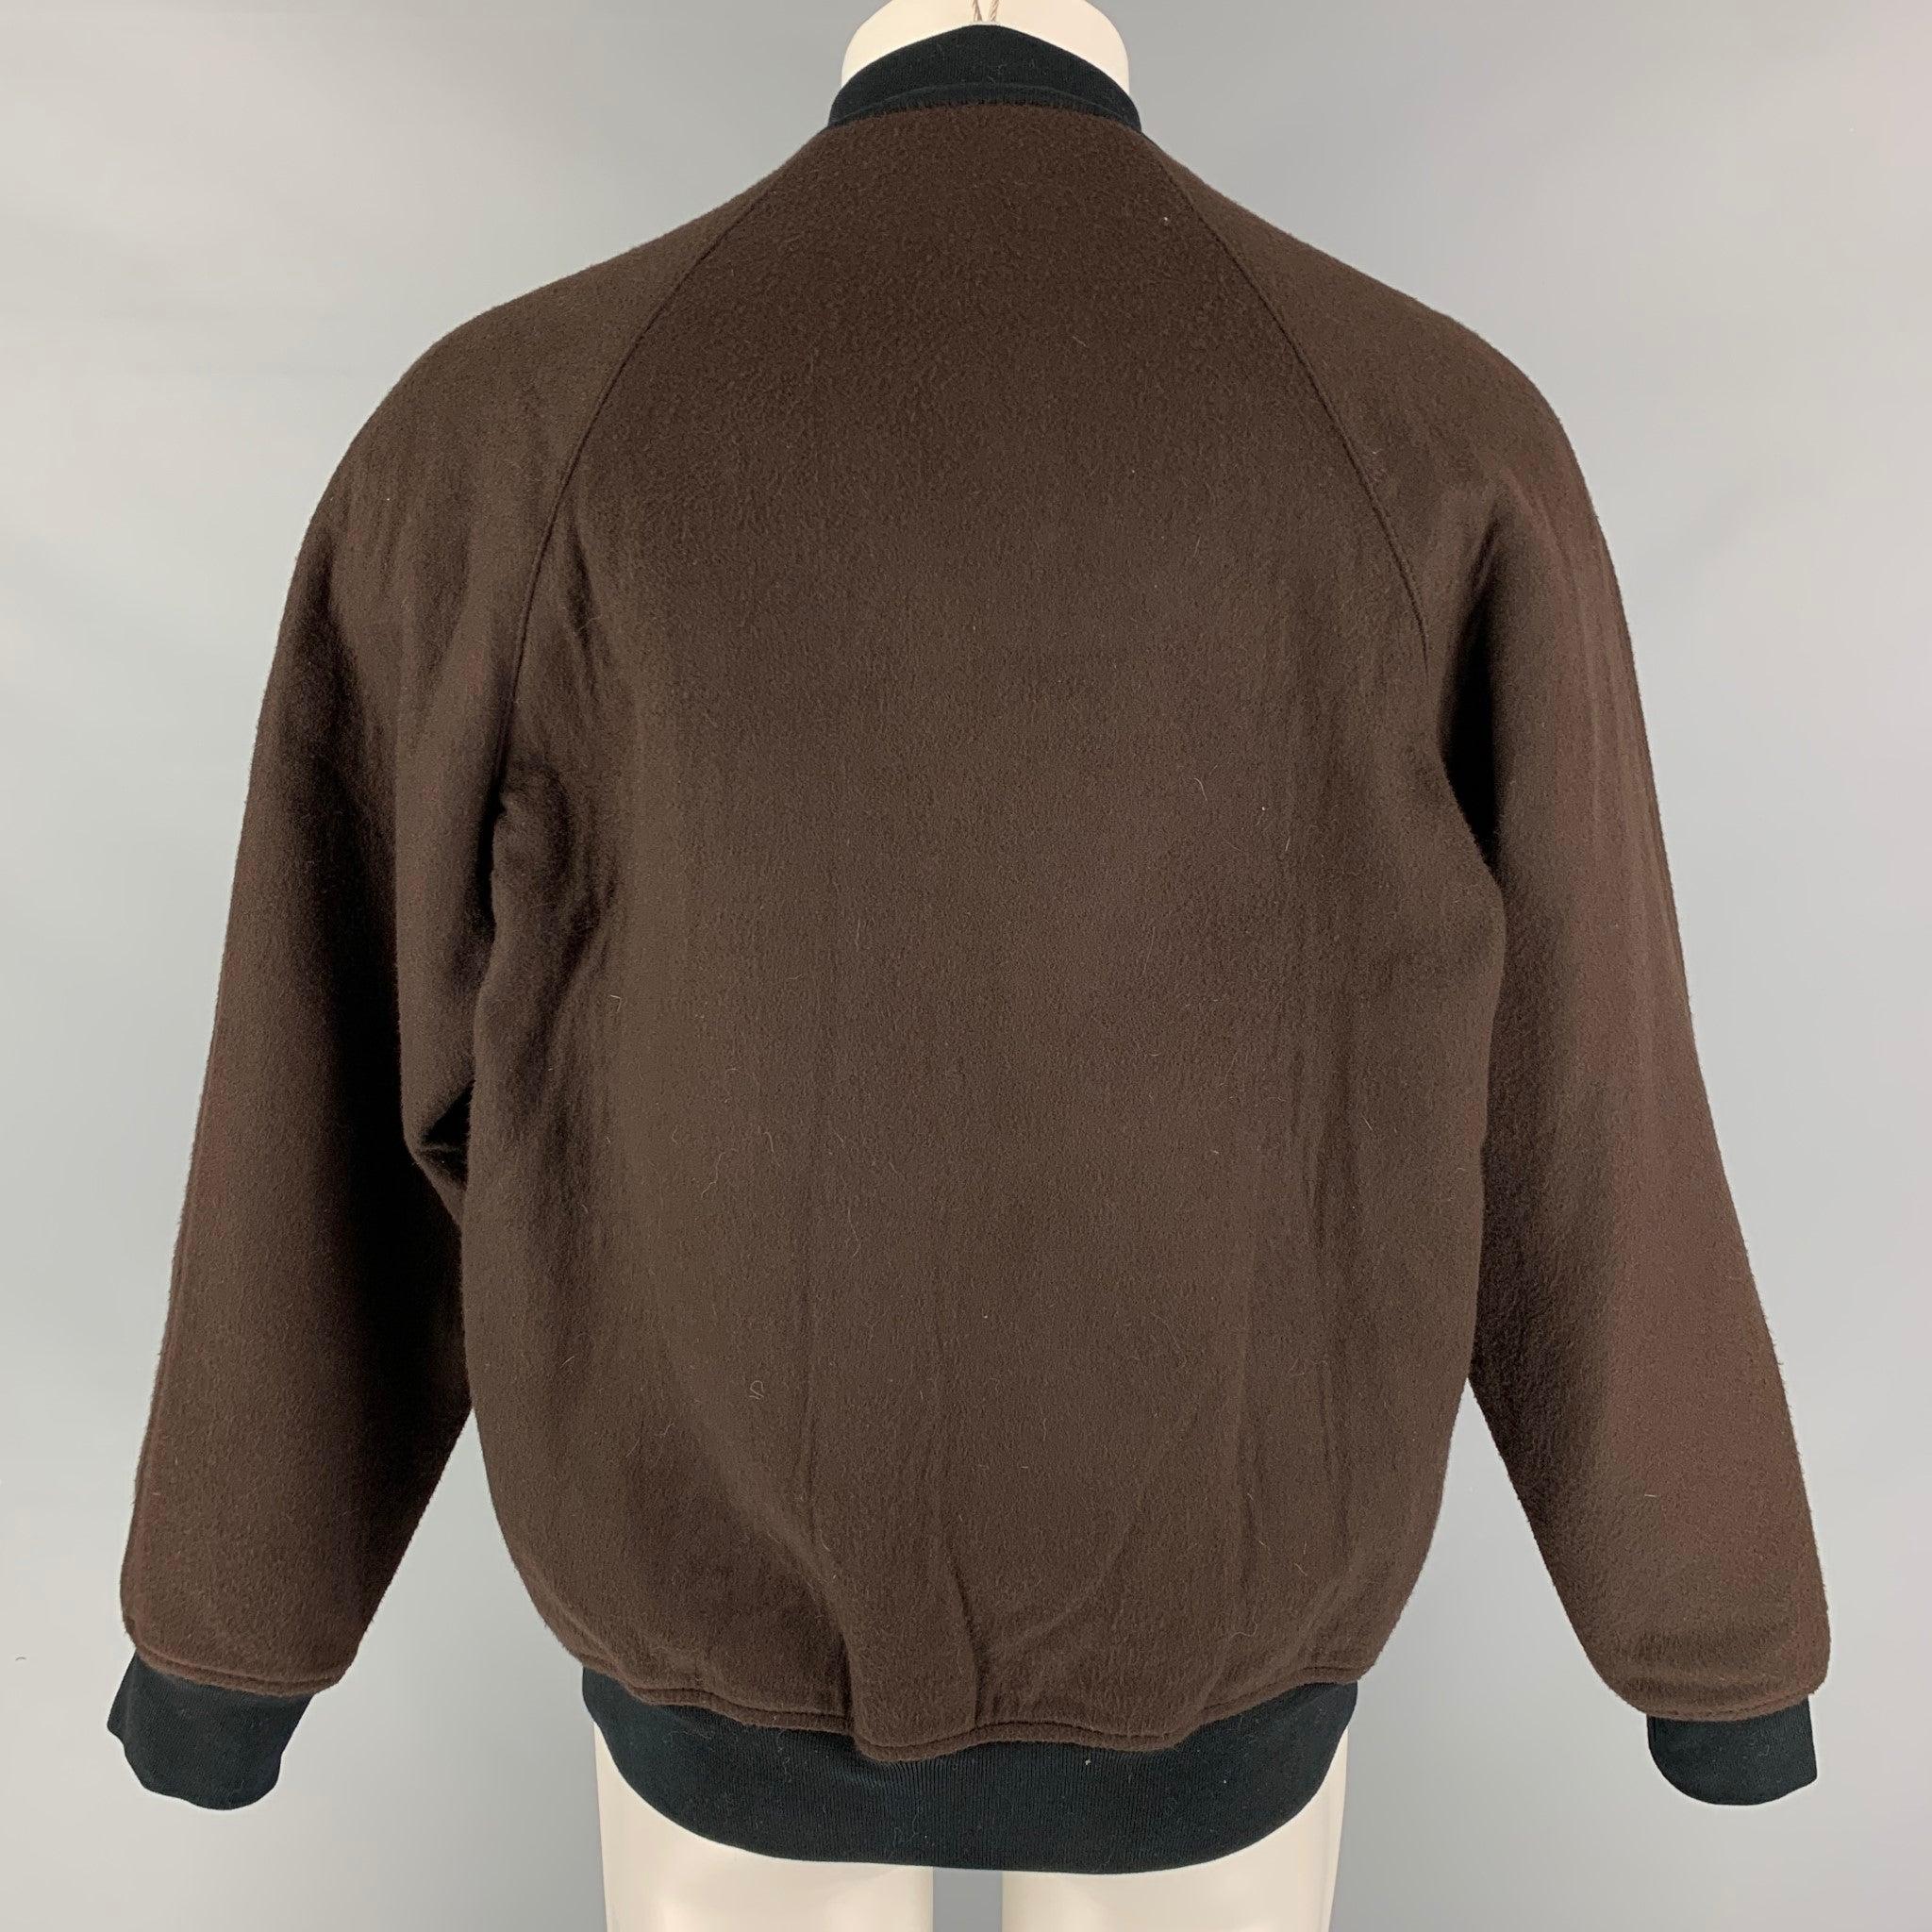 MARC JACOBS Size 38 Brown Wool Blend Bomber Jacket In Good Condition For Sale In San Francisco, CA